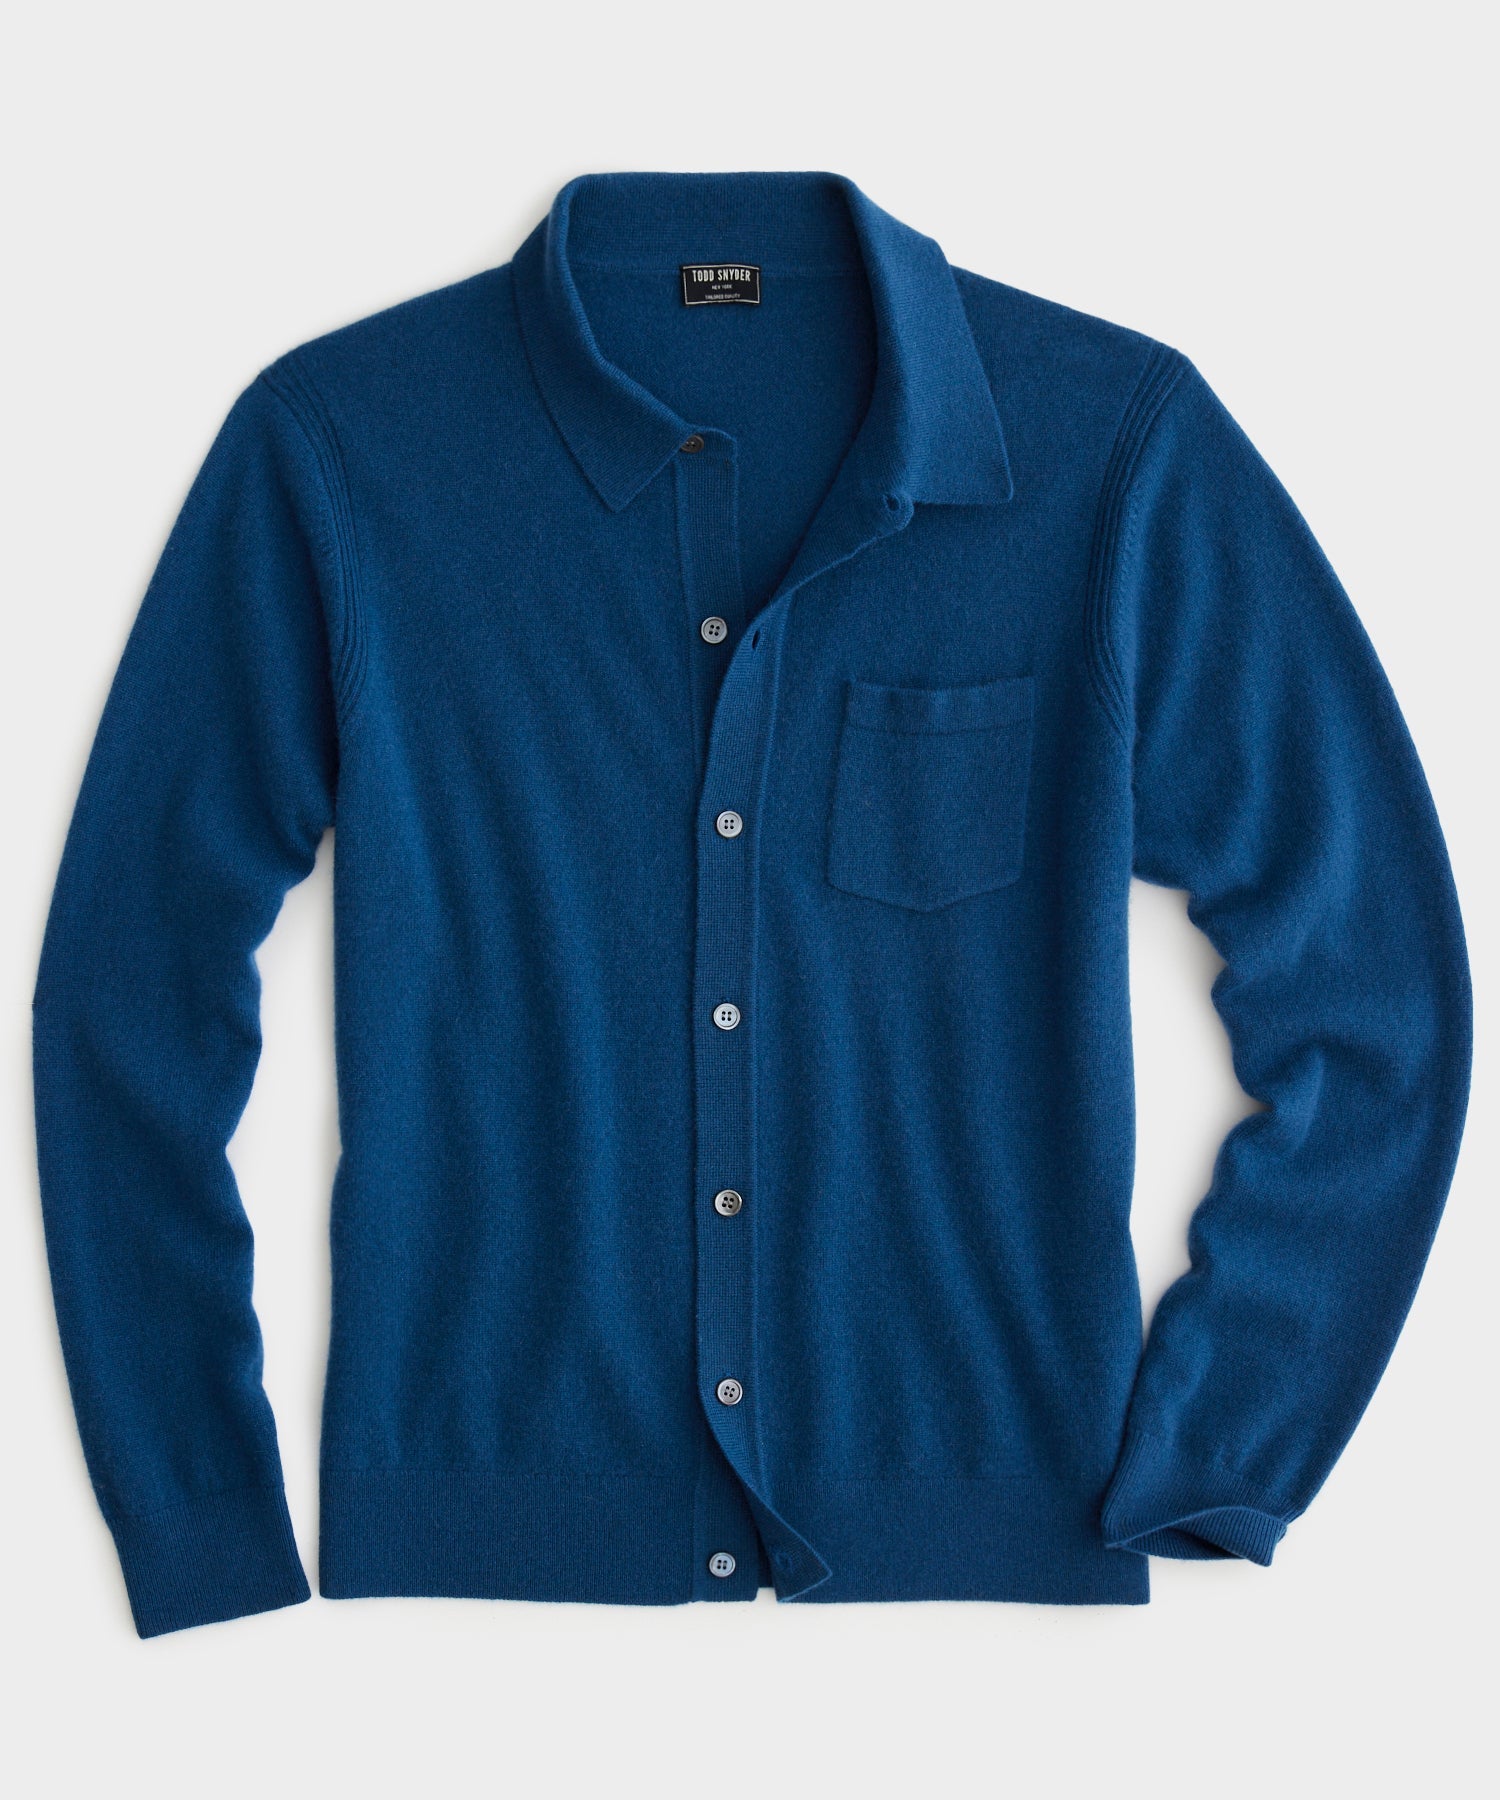 Cashmere Long-Sleeve Sweater Polo in Dark Teal